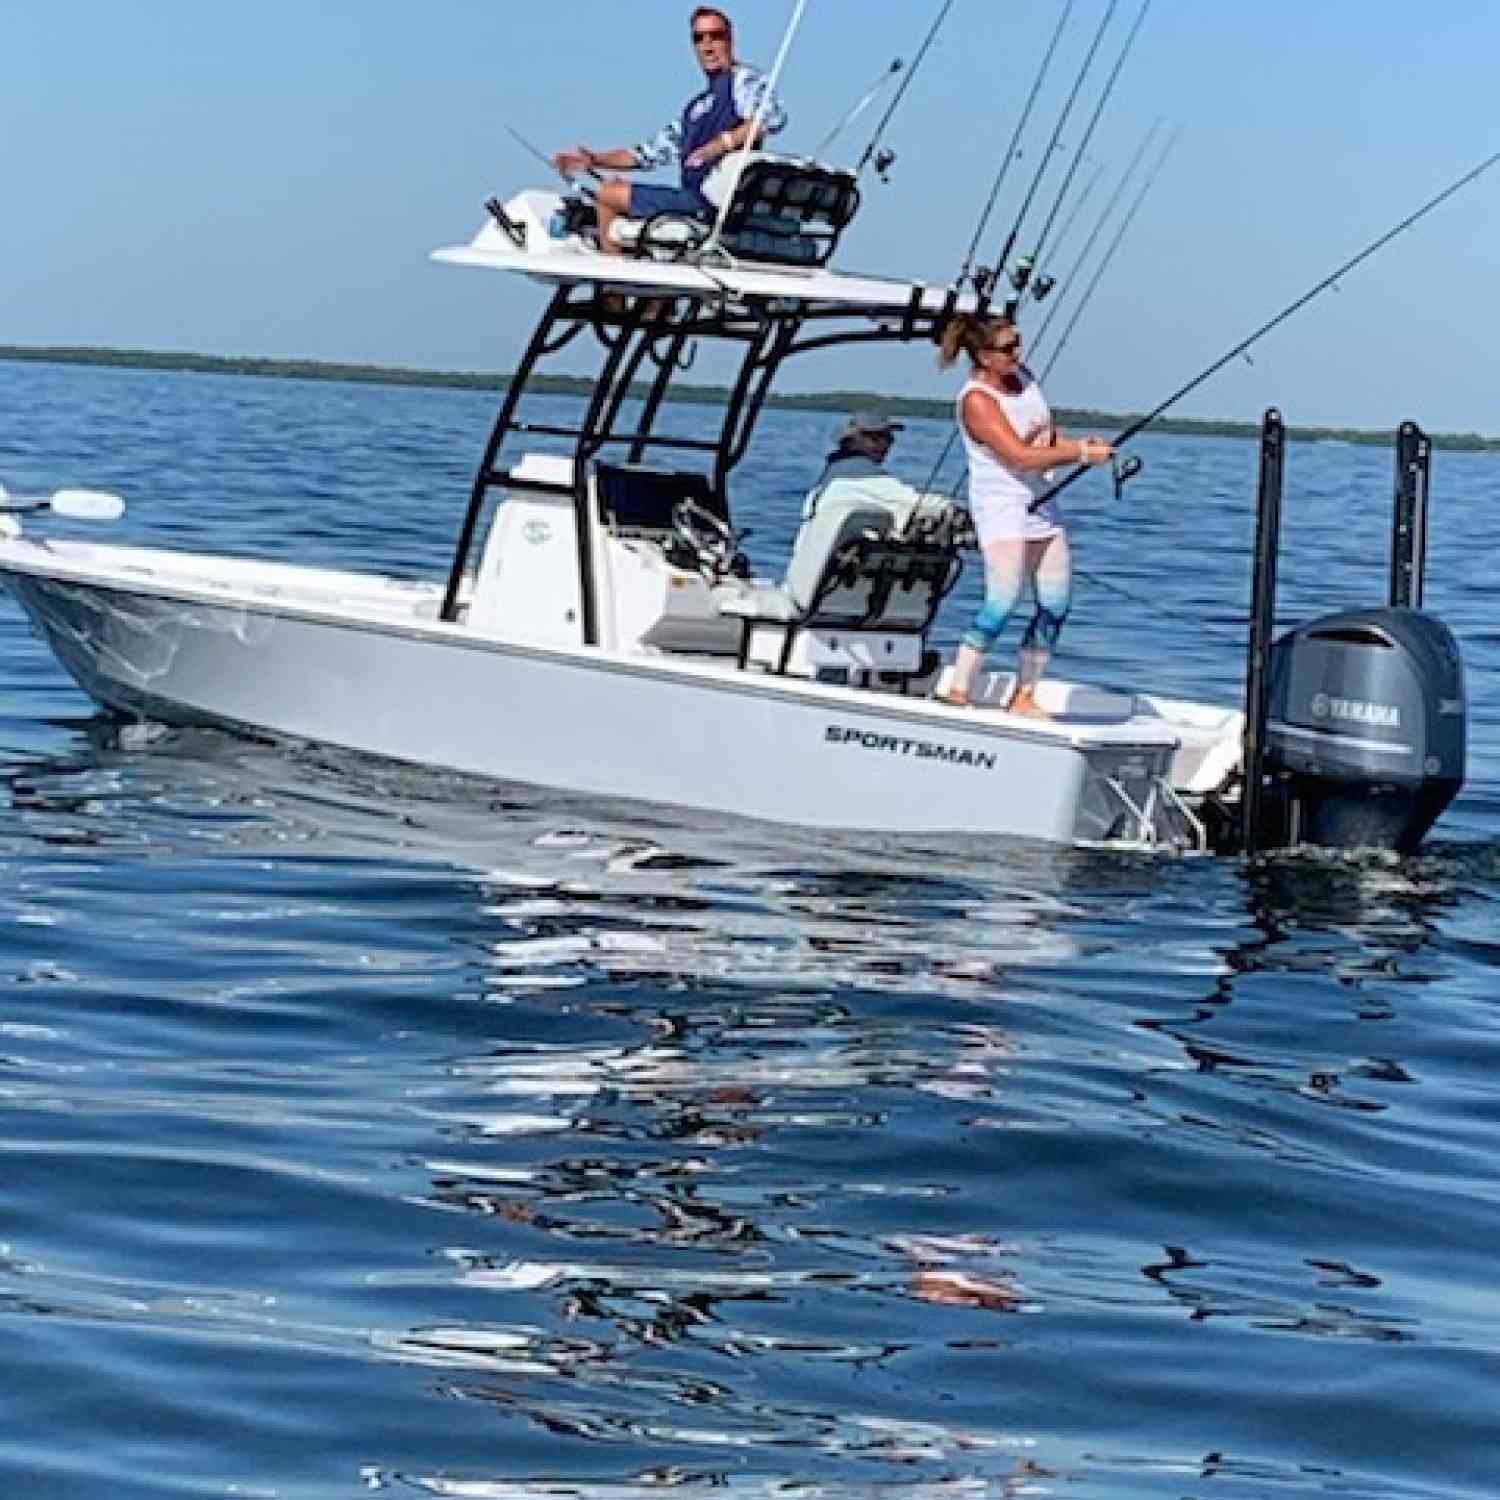 Title: Fish On! - On board their Sportsman Heritage 241 Center Console - Location: Punta Gorda Florida. Participating in the Photo Contest #SportsmanJune2020